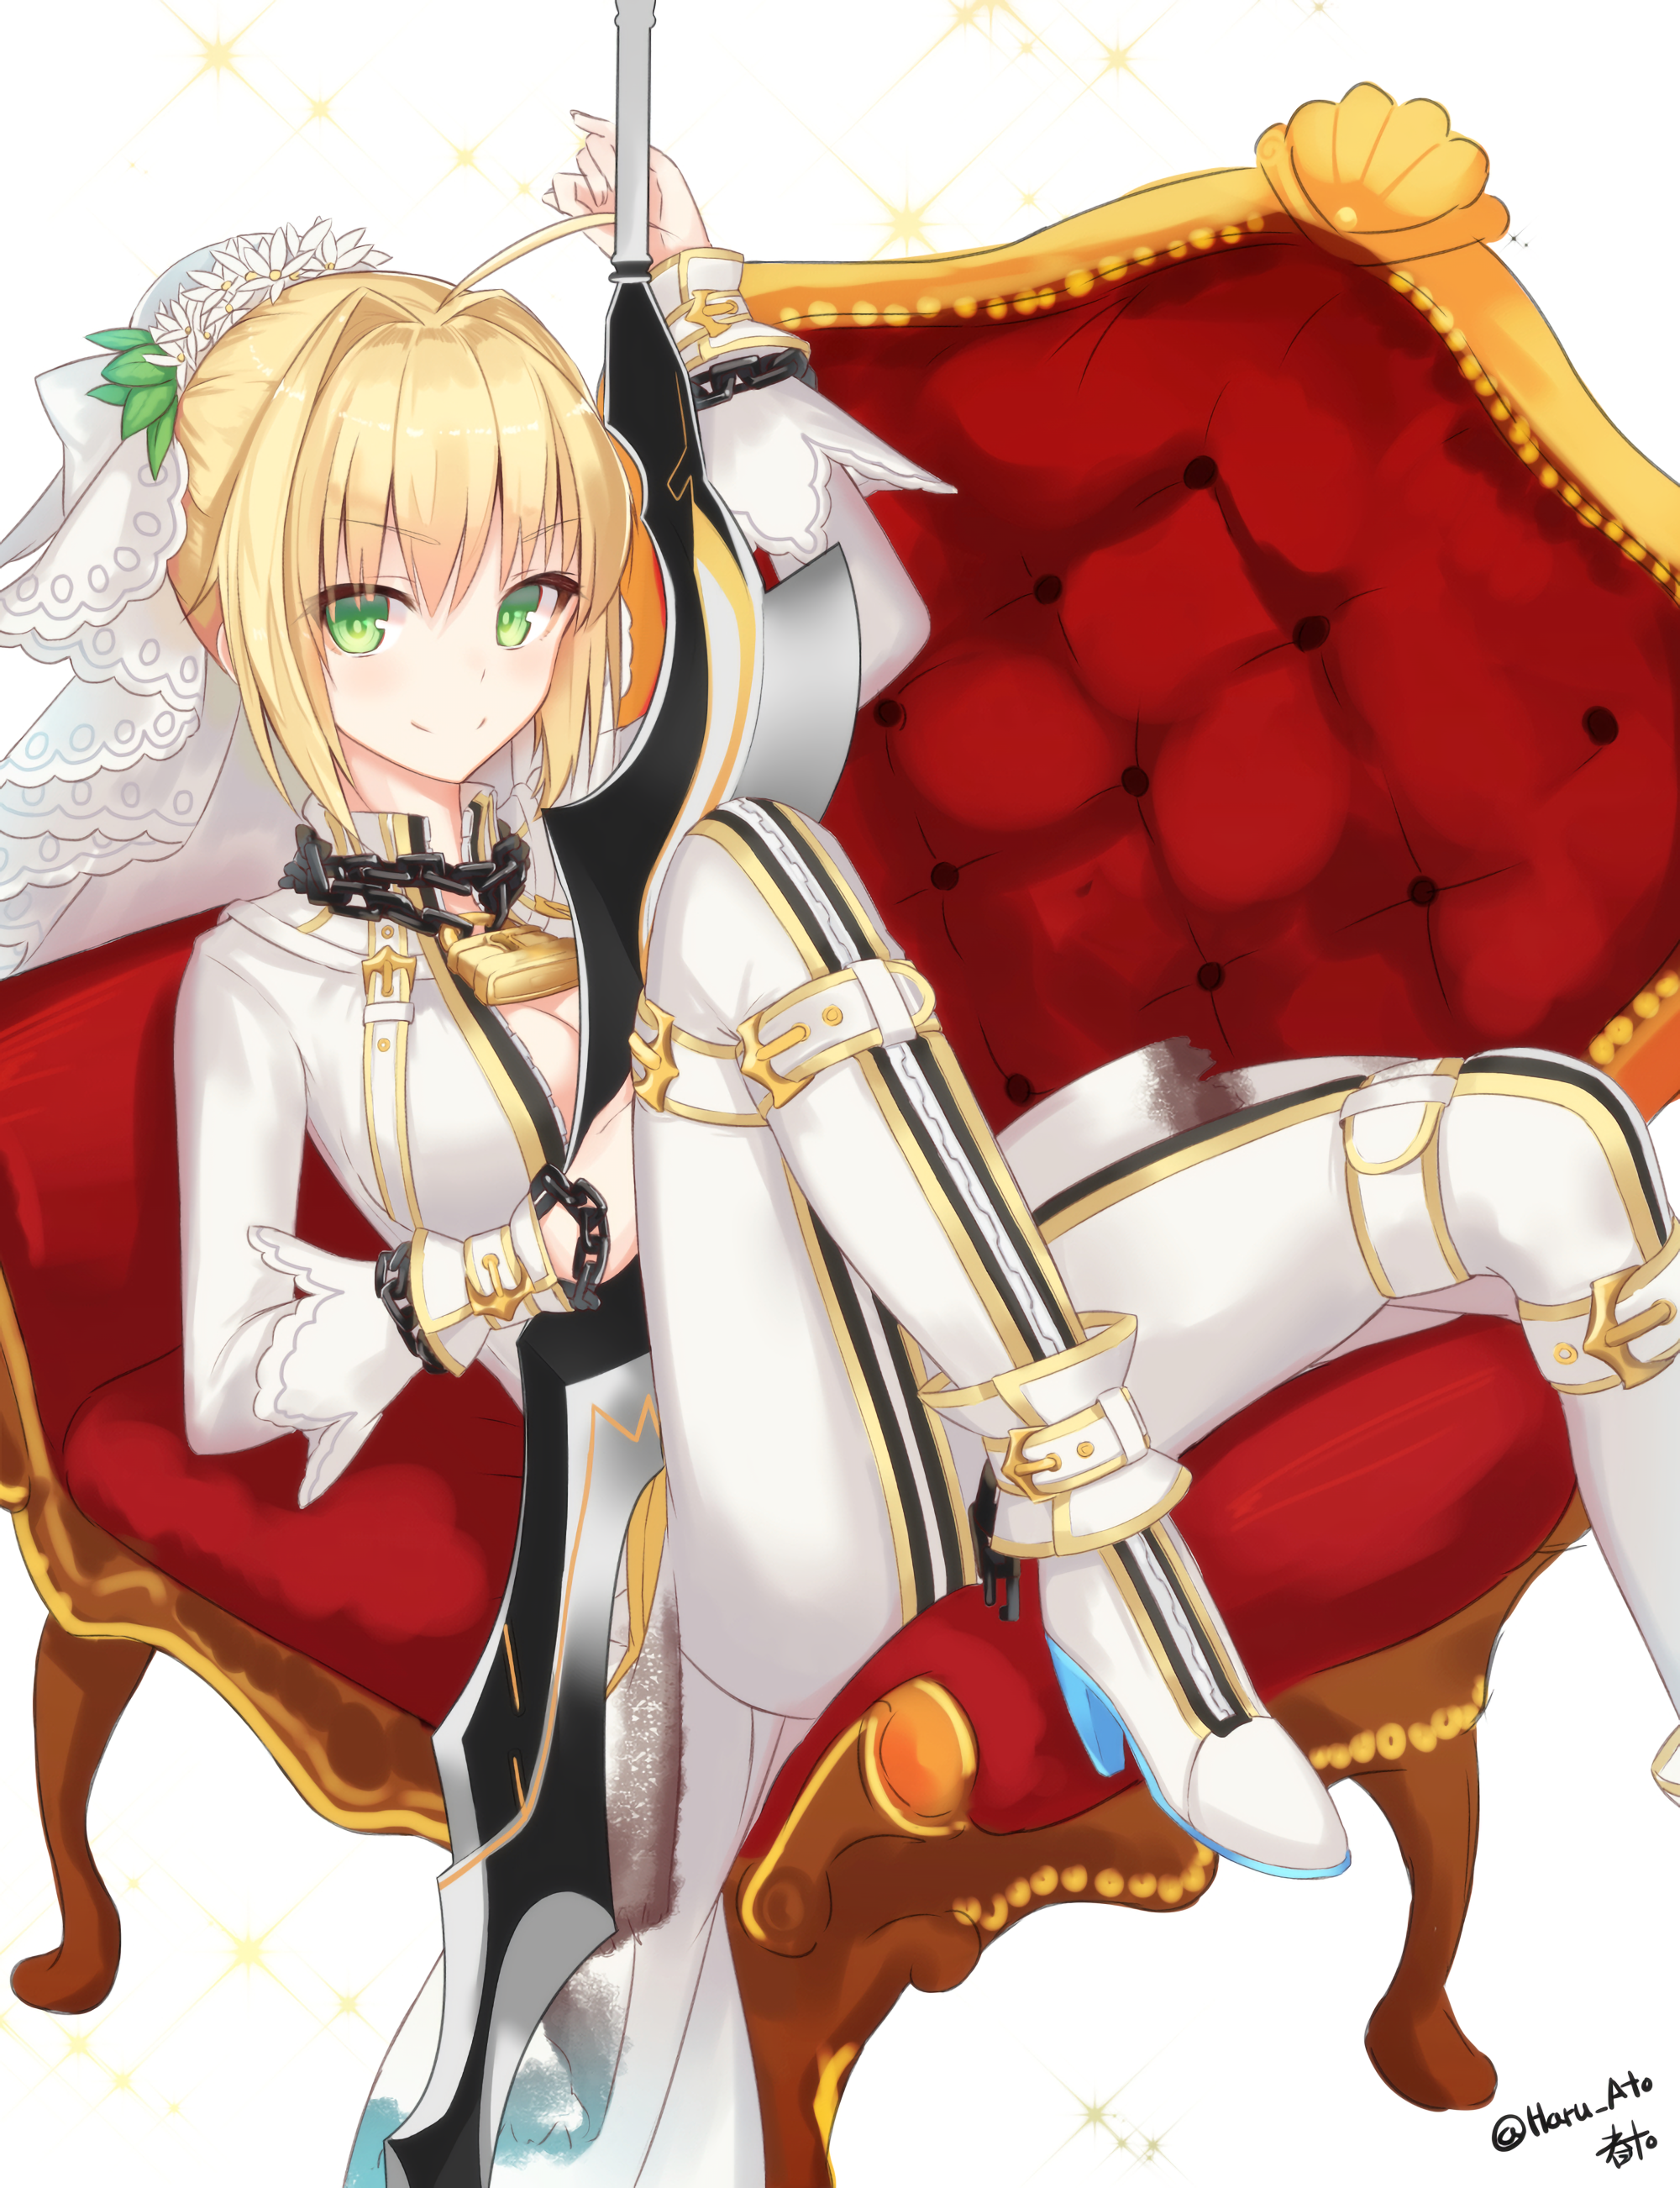 Anime 2000x2604 anime anime girls Saber Bride Fate/Extra CCC Fate/Grand Order bodysuit open shirt short hair blonde green eyes weapon Nero Claudius Fate series